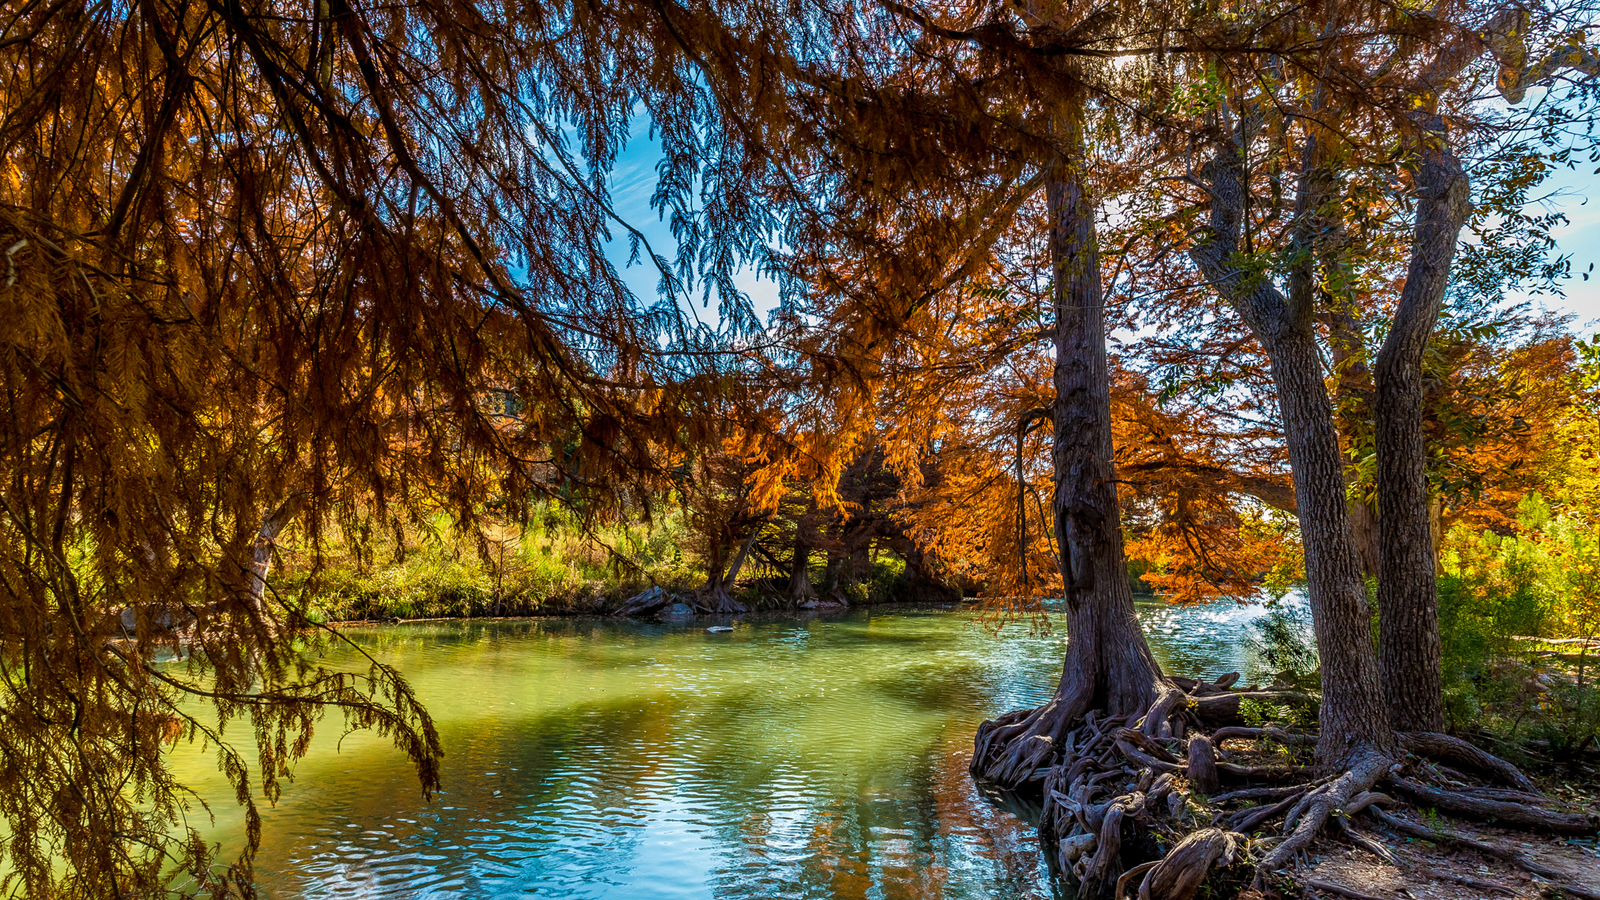 Beautiful State Parks - Guadalupe River State Park